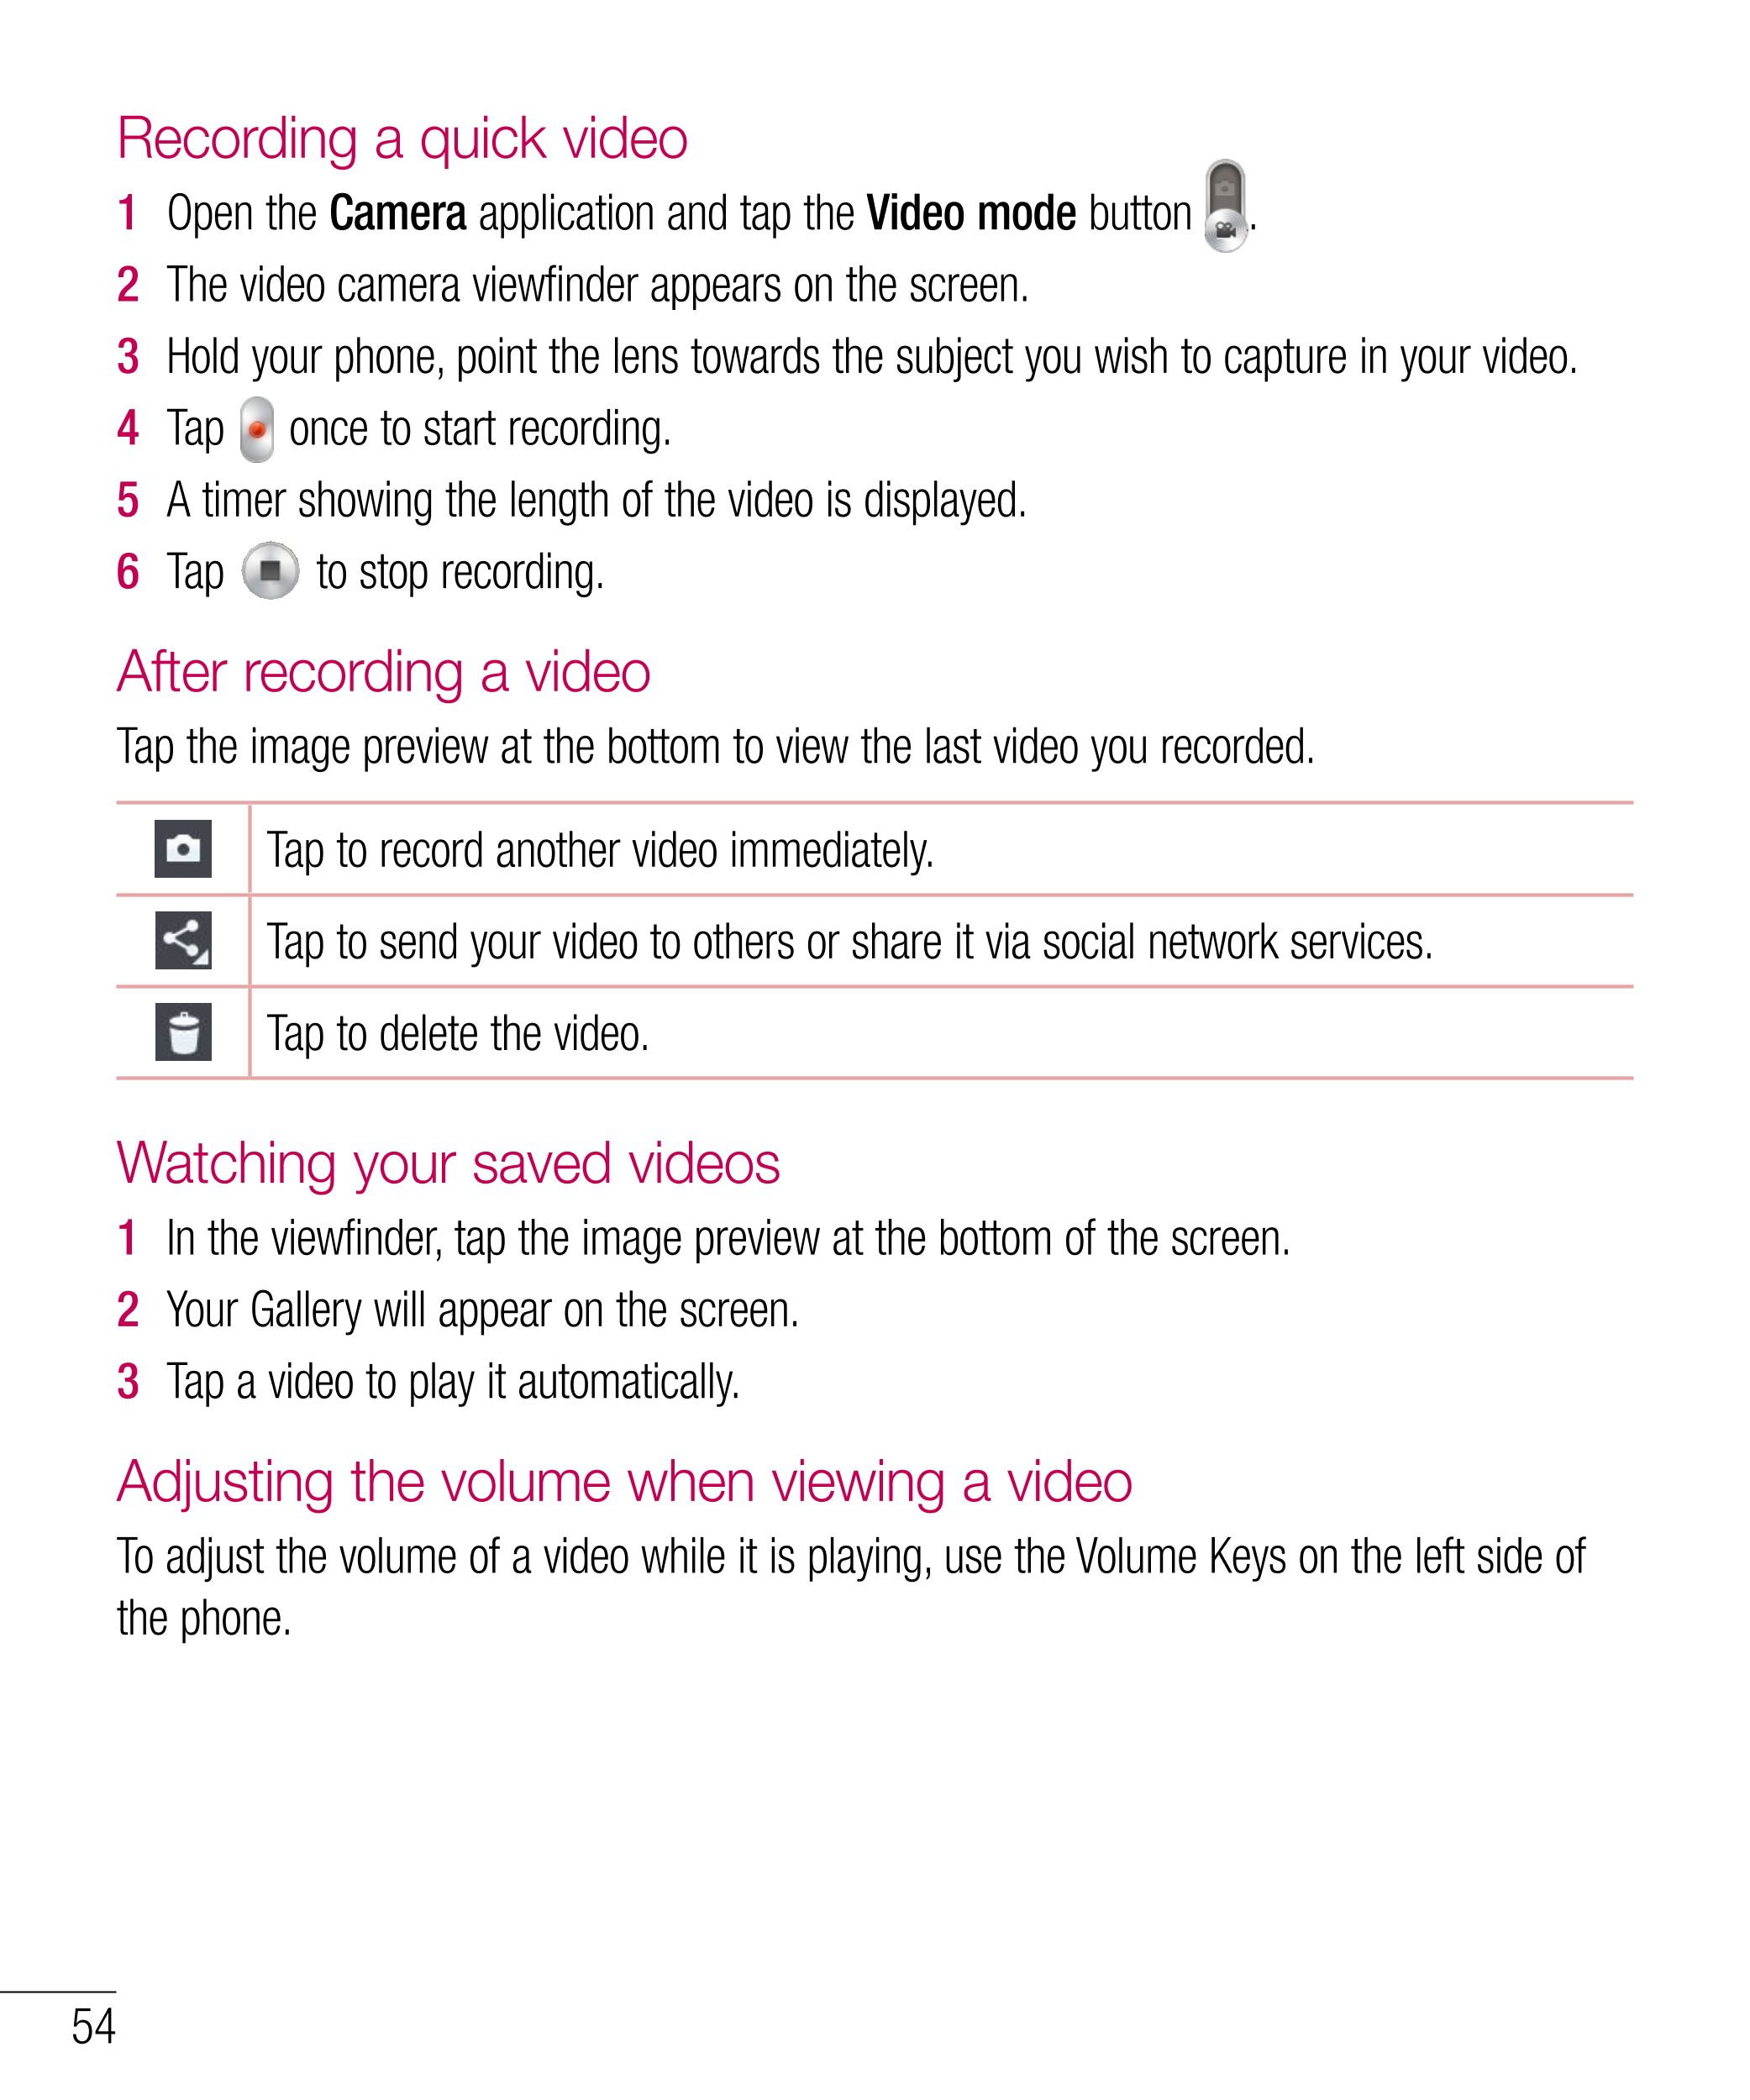 Recording a quick video
1  Open the Camera application and tap the Video mode button  . 
2  The video camera viewfinder appears 